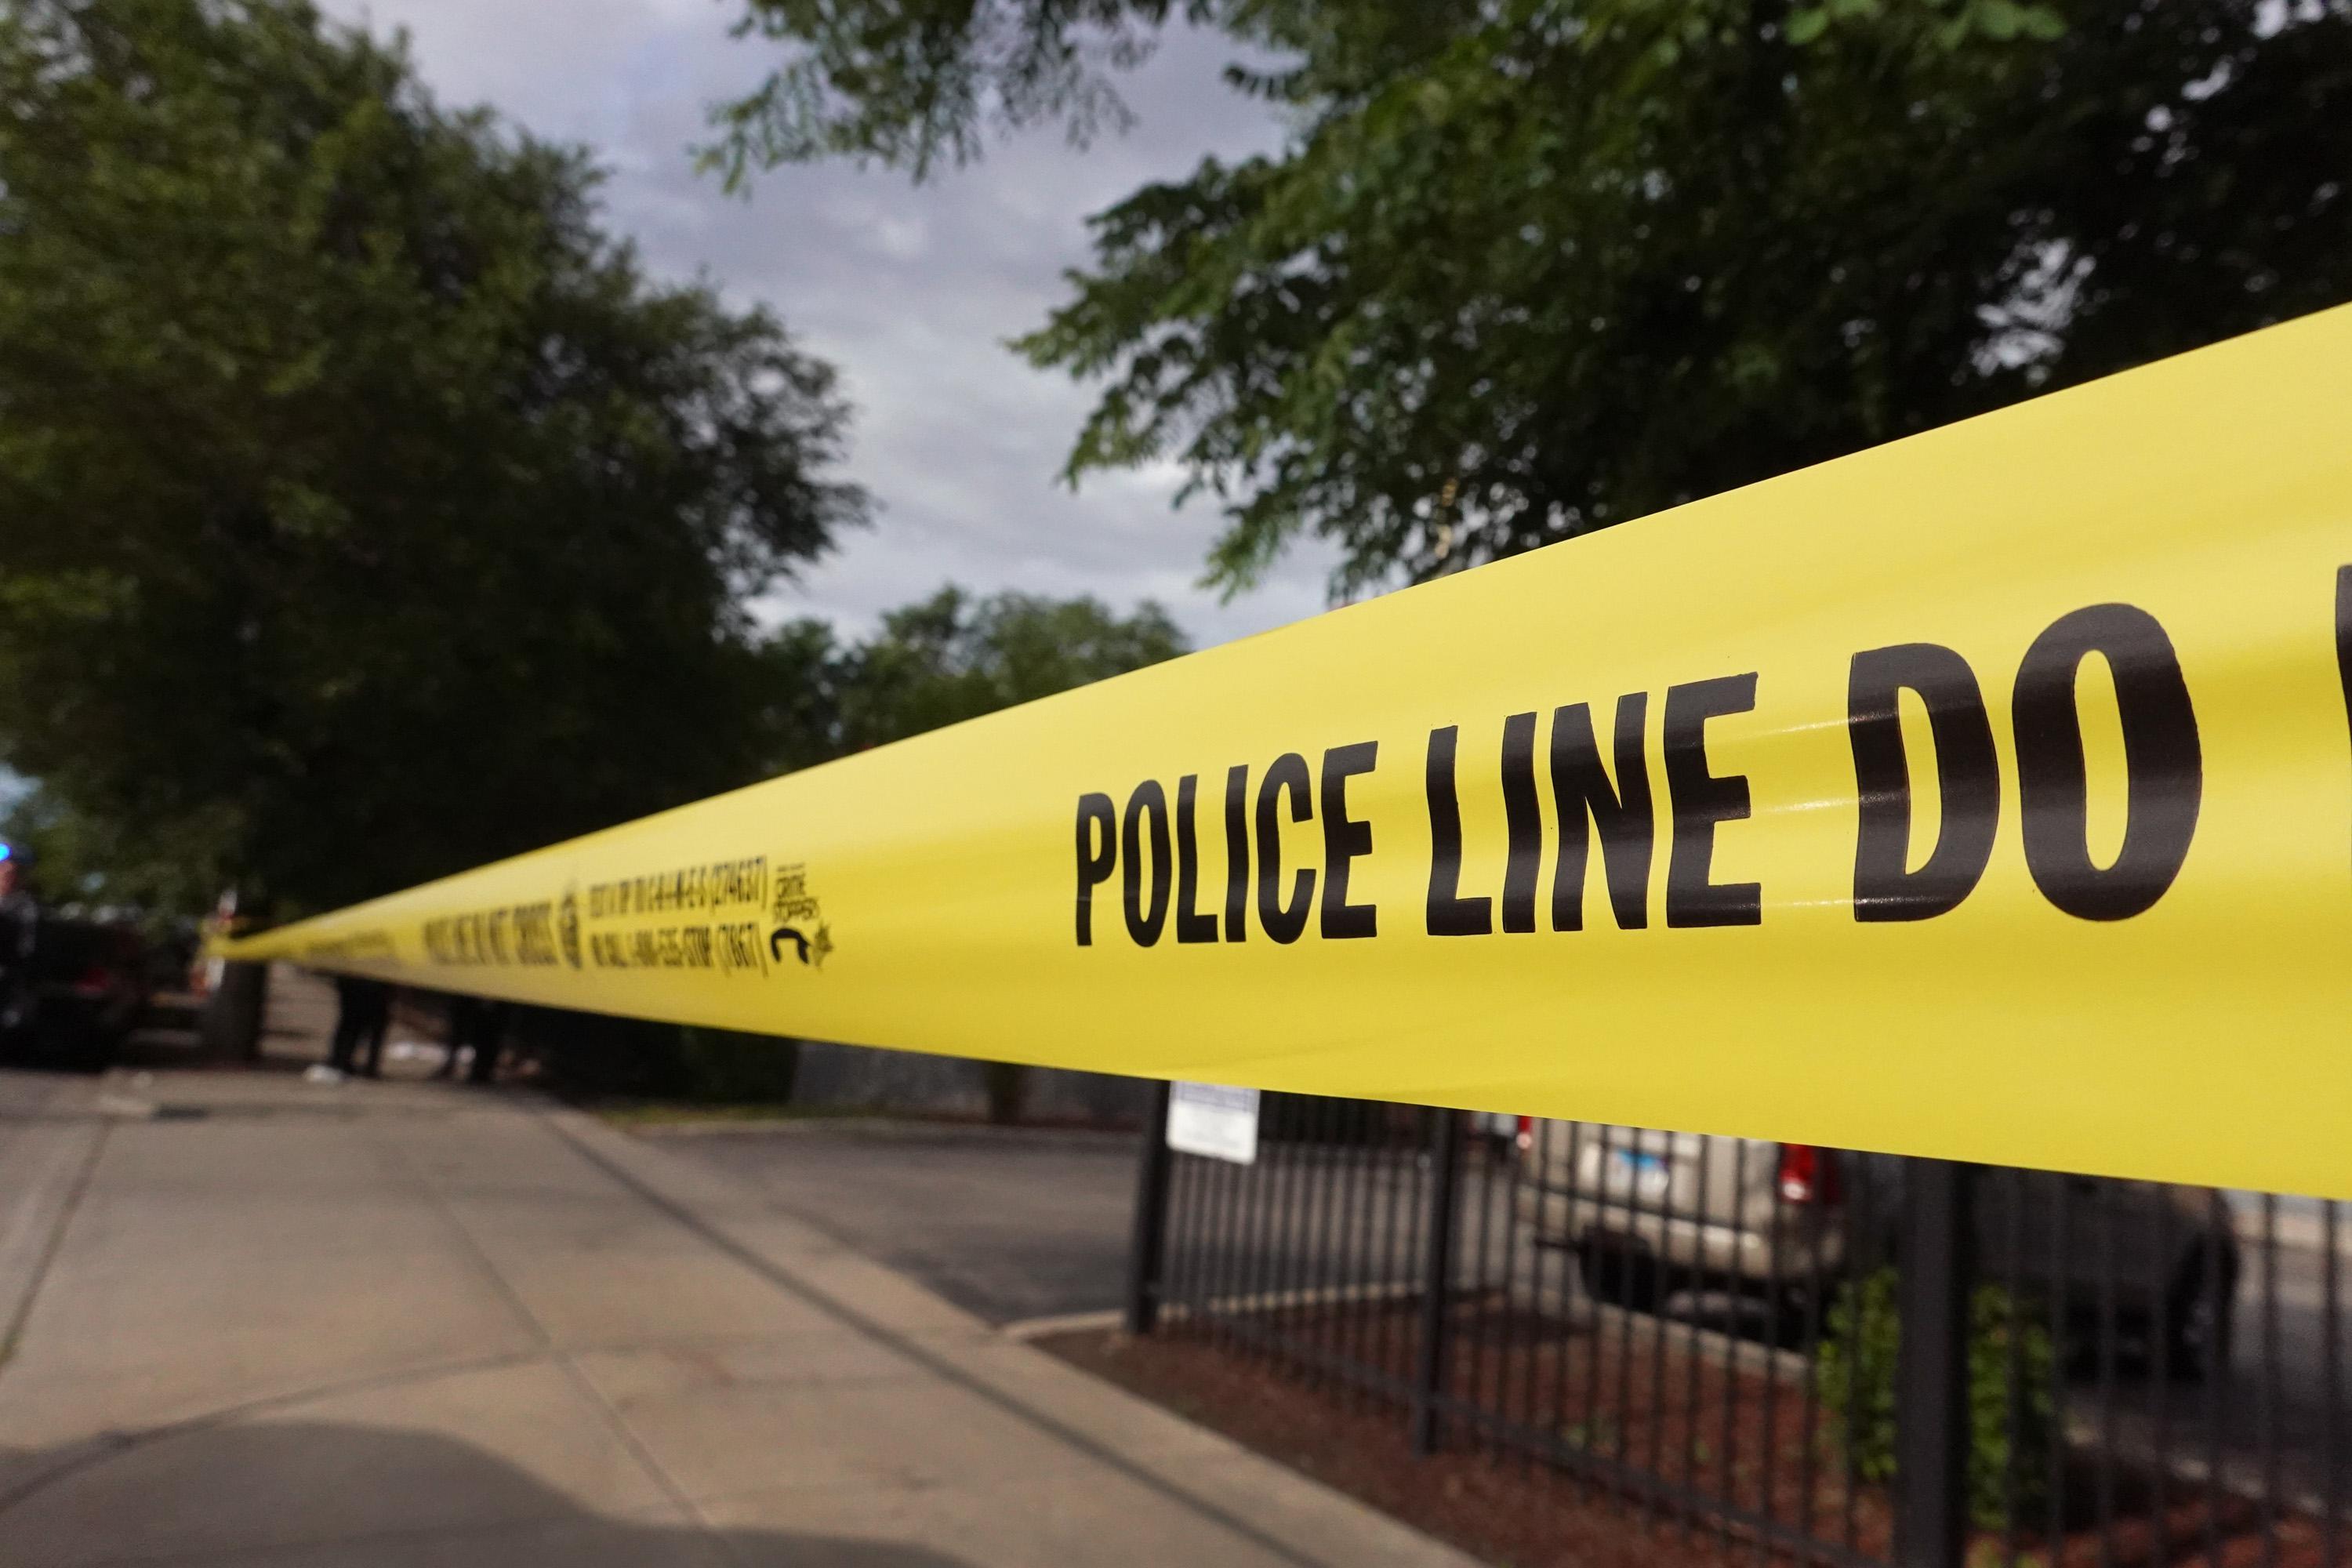 Police tape surrounds a crime scene where three people were shot at the Wentworth Gardens housing complex in the Bridgeport neighborhood on June 23, 2021 in Chicago, Illinois. 